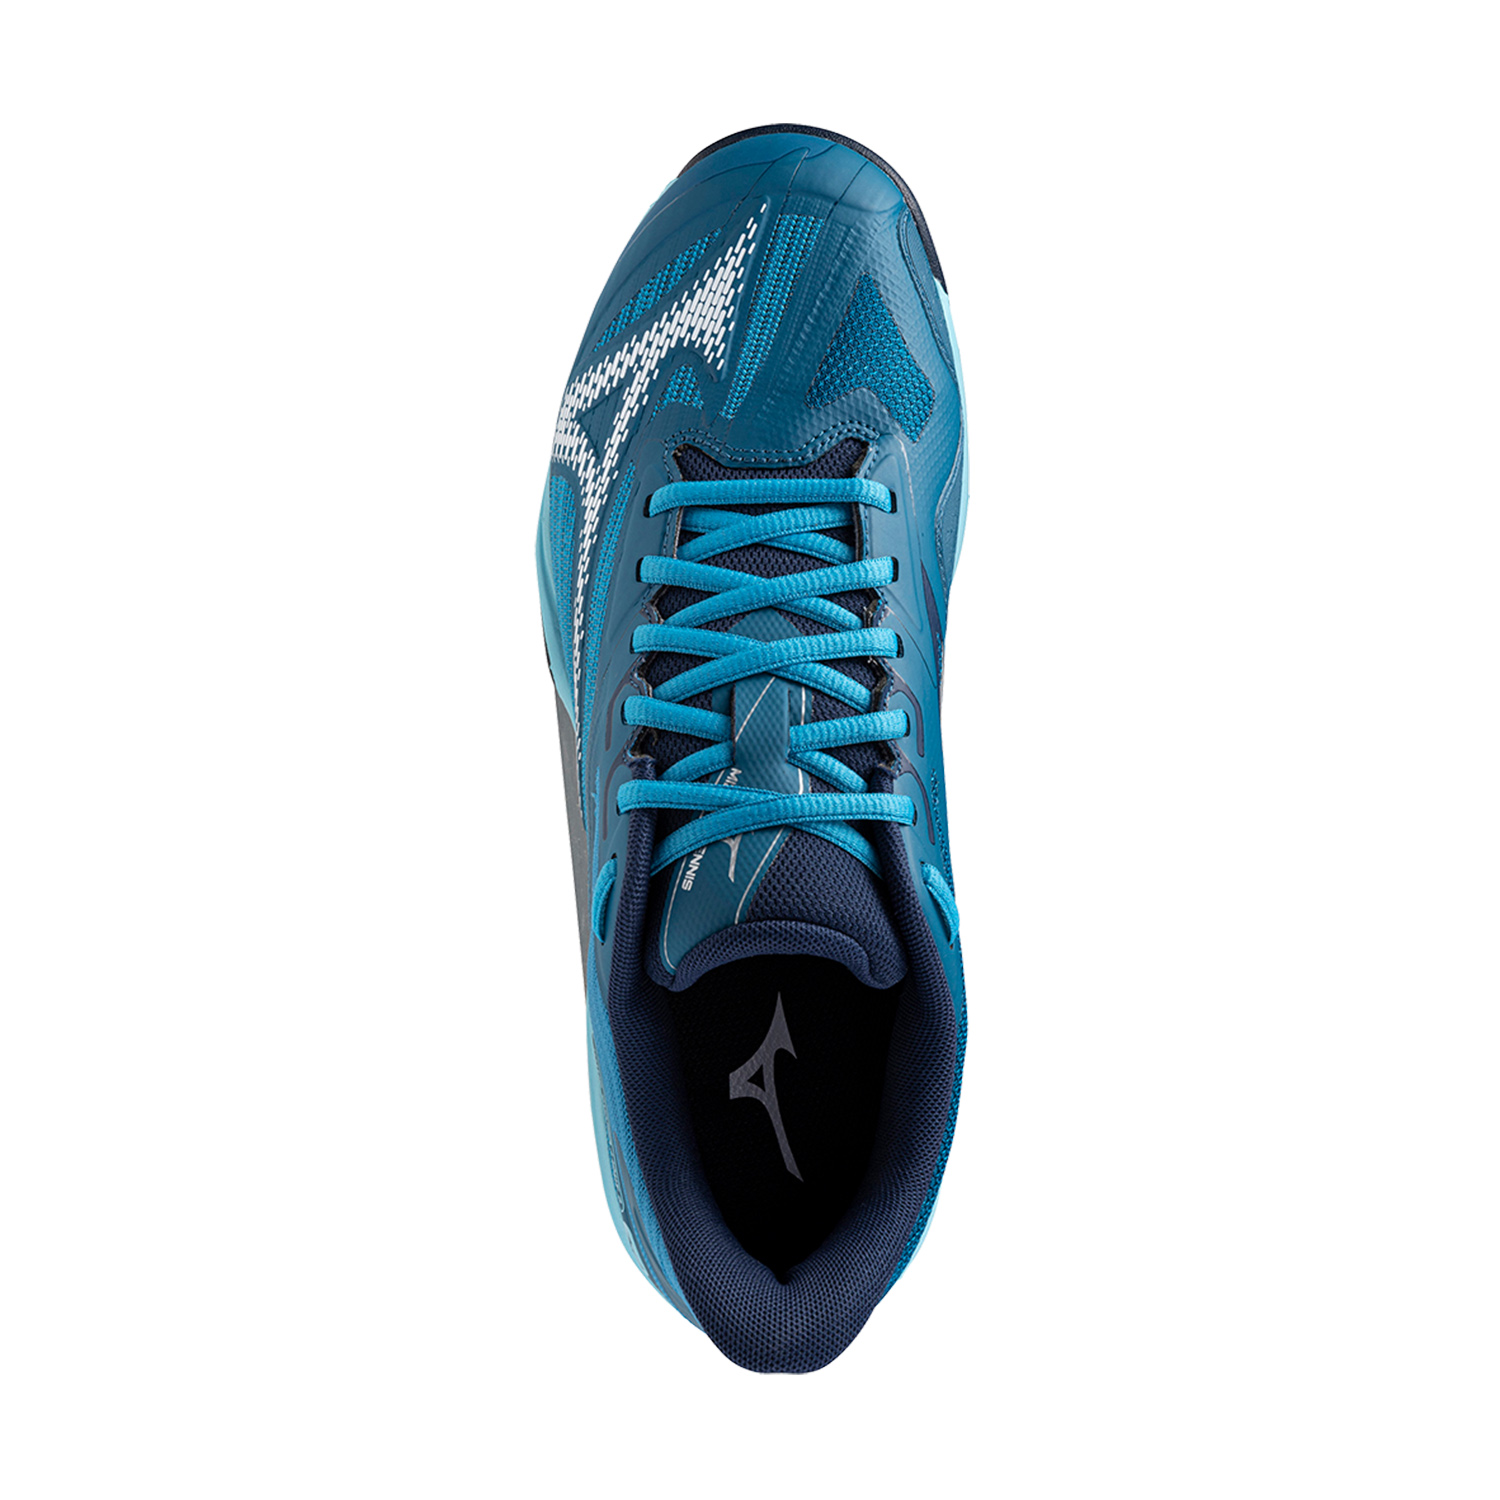 Mizuno Wave Exceed Light 2 All Court - Moroccan Blue/White/Bluejay